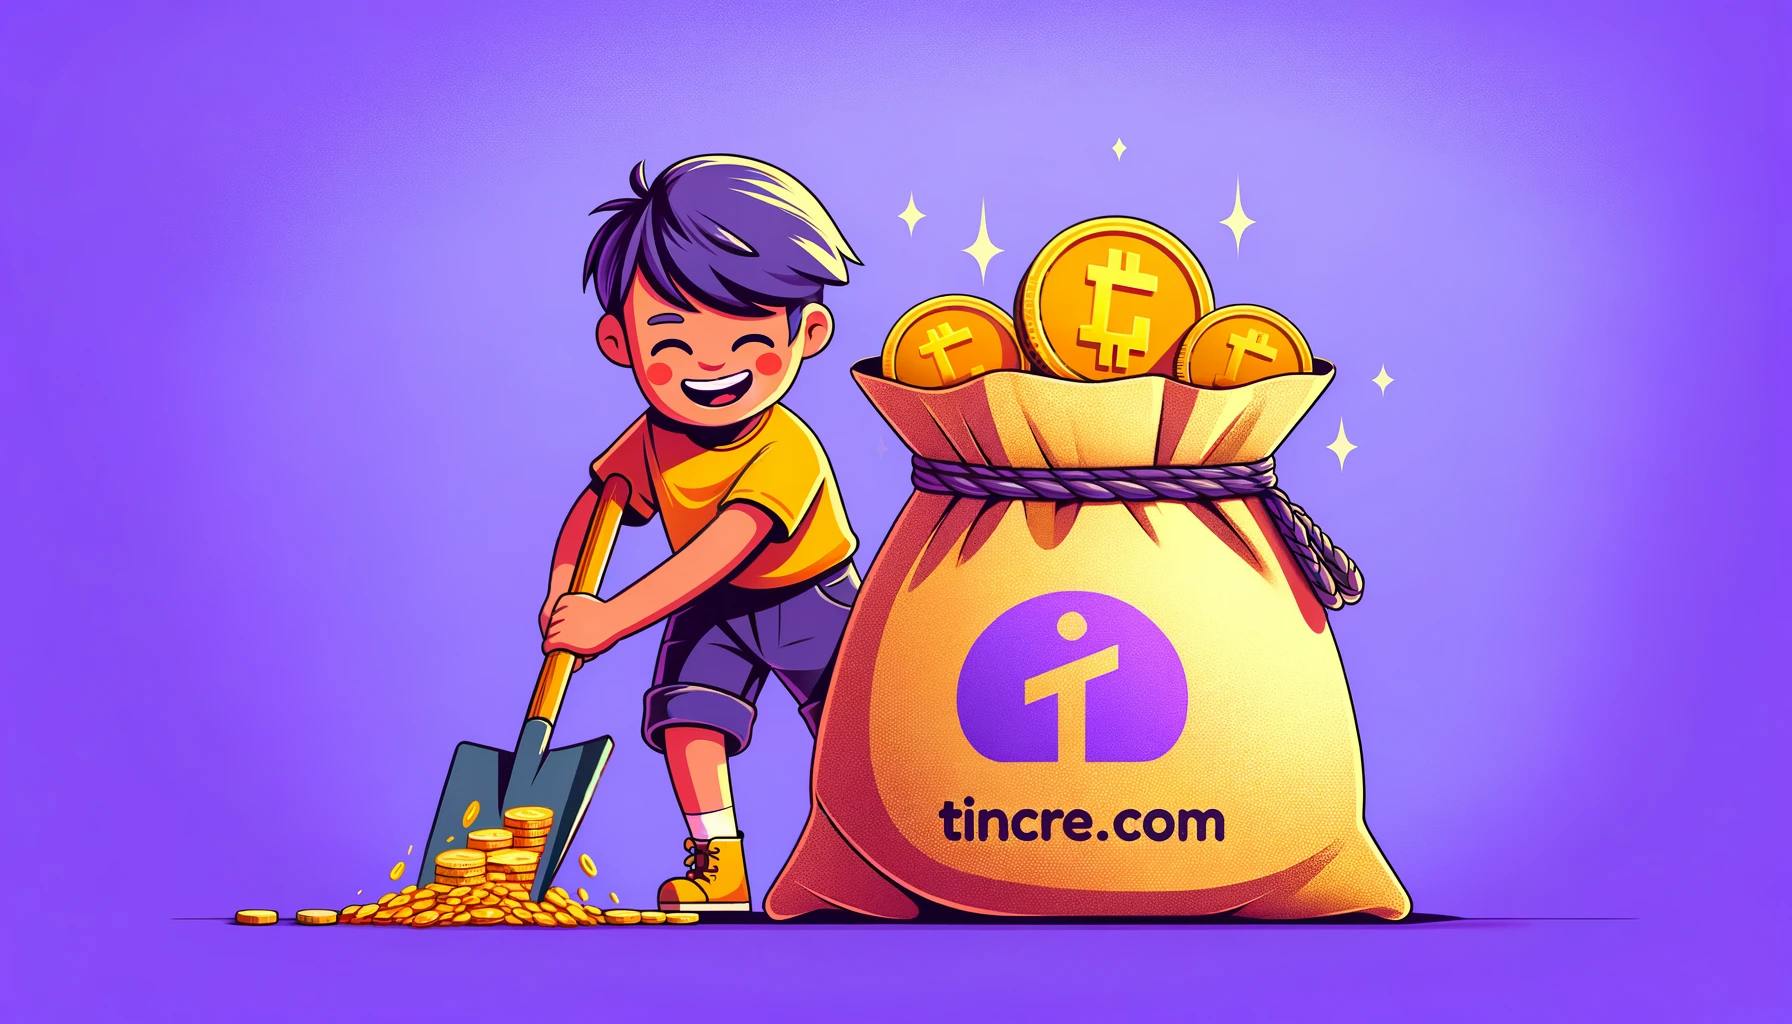 A tincre.com client happily shoveling his referral money into a canvas bag with tincre.com spelled in purple on the side.